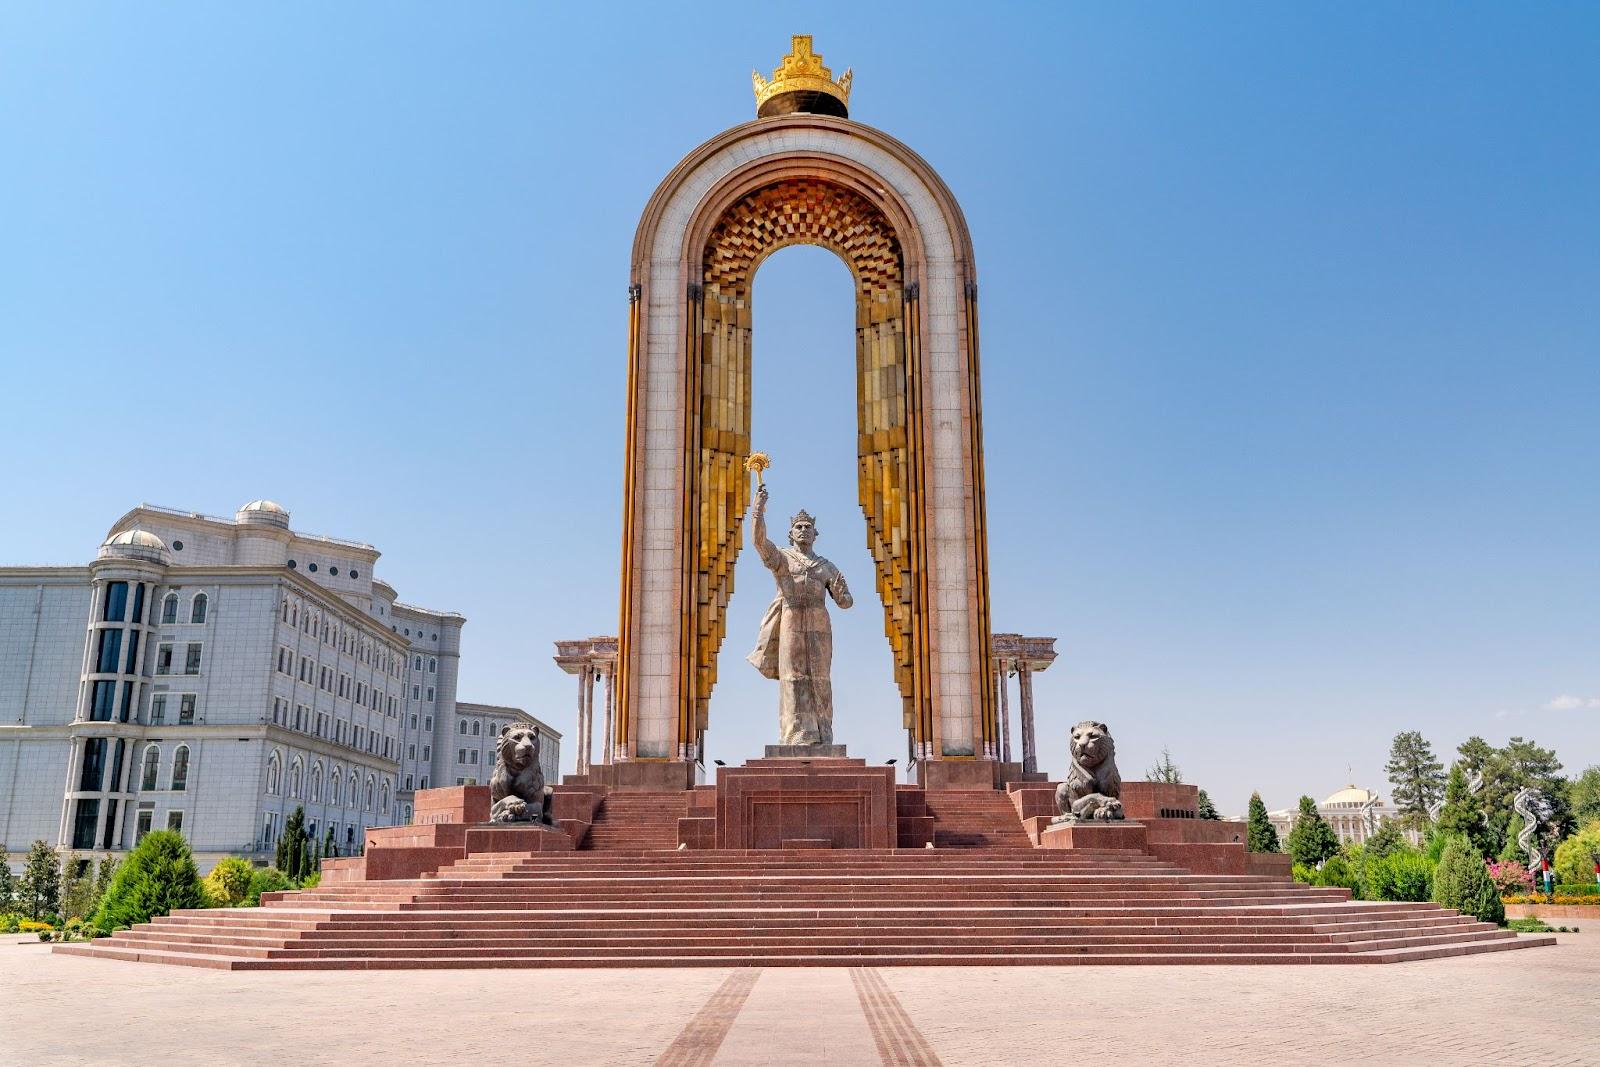 The central square in the capital of Tajikistan - Dushanbe.